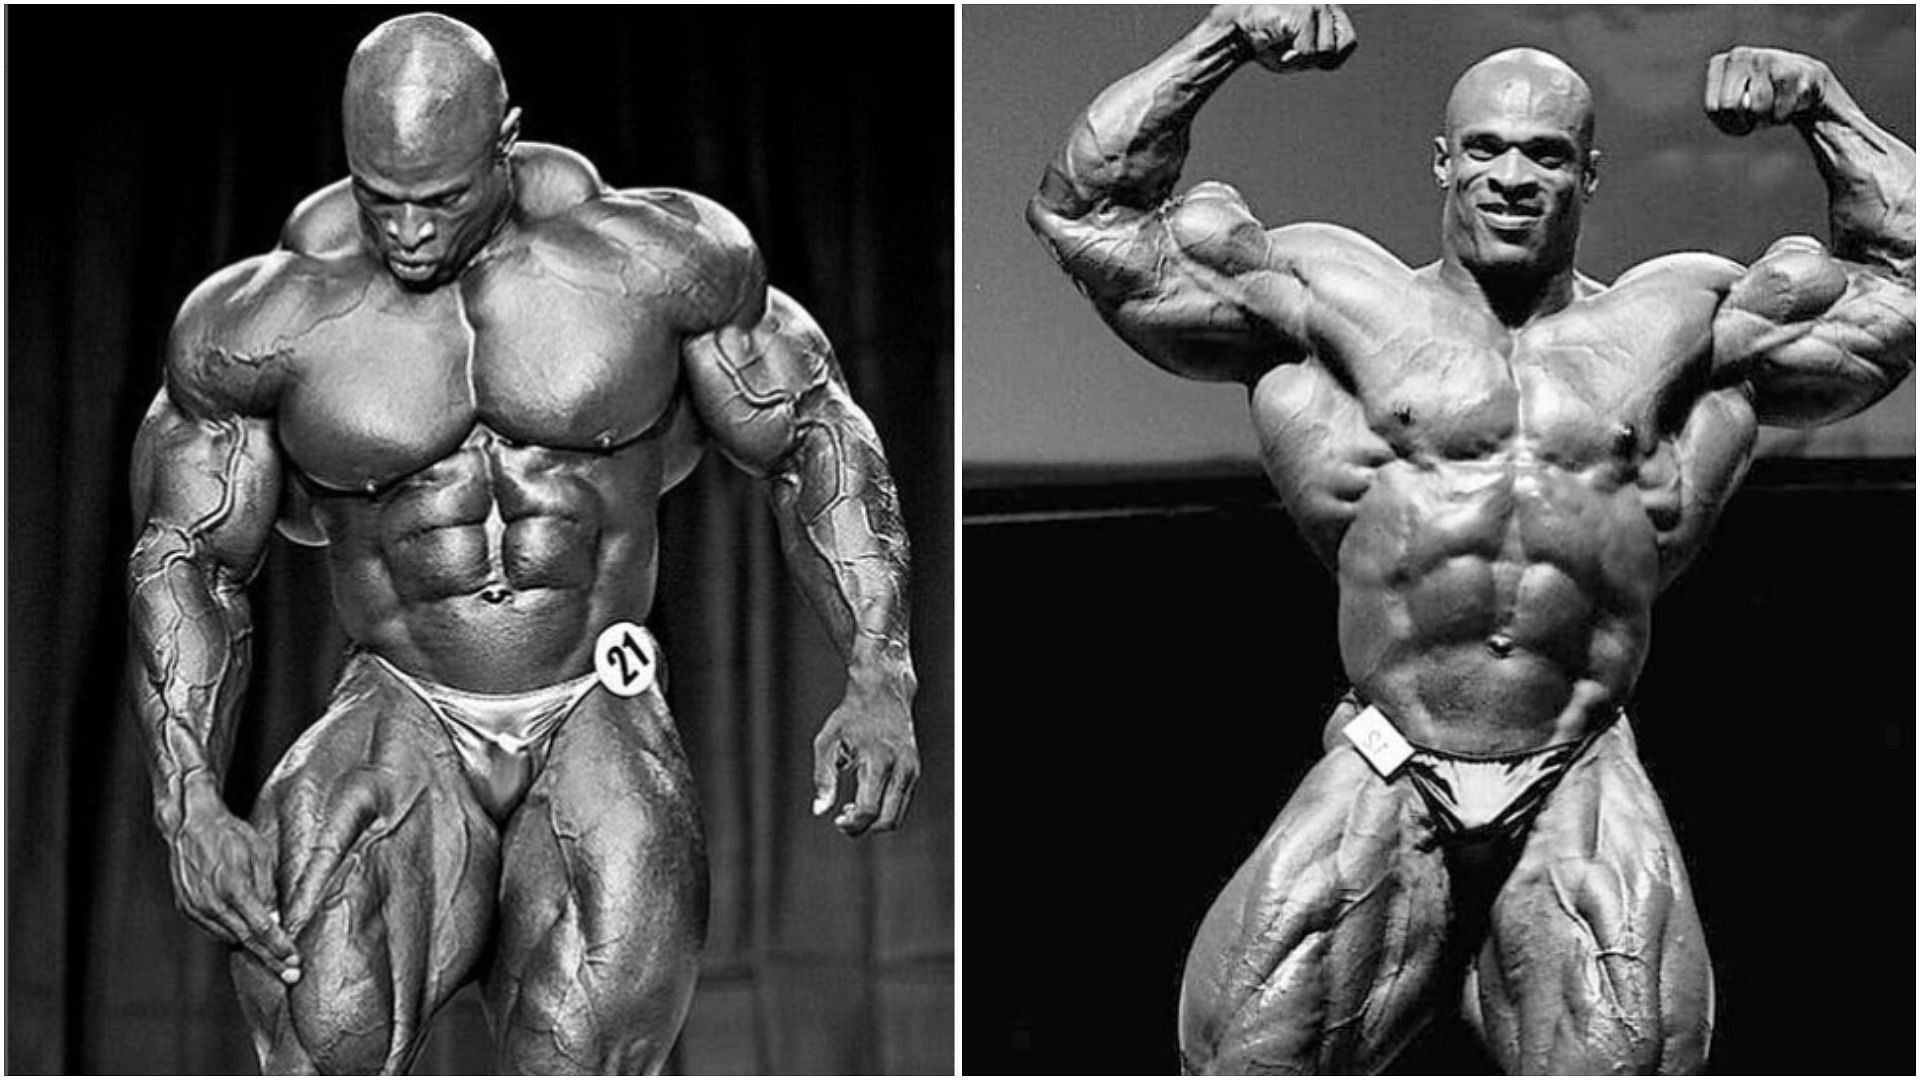 Ronnie Coleman won the Mr. Olympia title eight times. (Image via IG @ronniecoleman8)